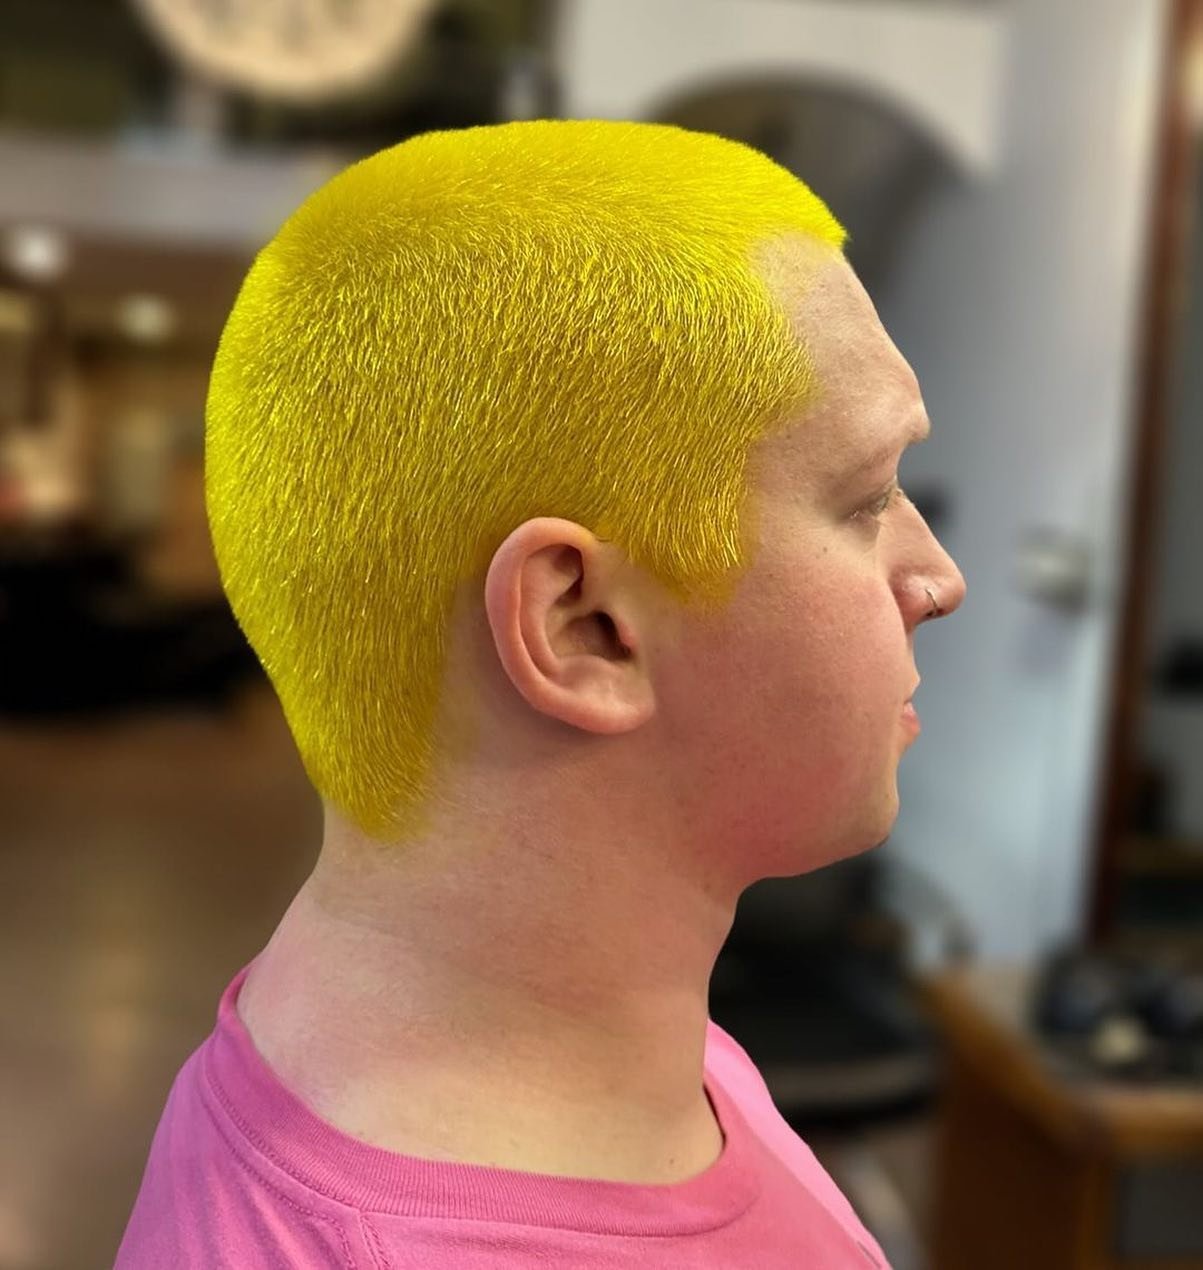 Neon color 💛
Limoncello with a hint of Absinth by the best @nikkietheglampireslayer @duomopro 

#thepowderroomla #losangeleshairstylist #hollywoodhairstylist #lahairstylist #diomopro